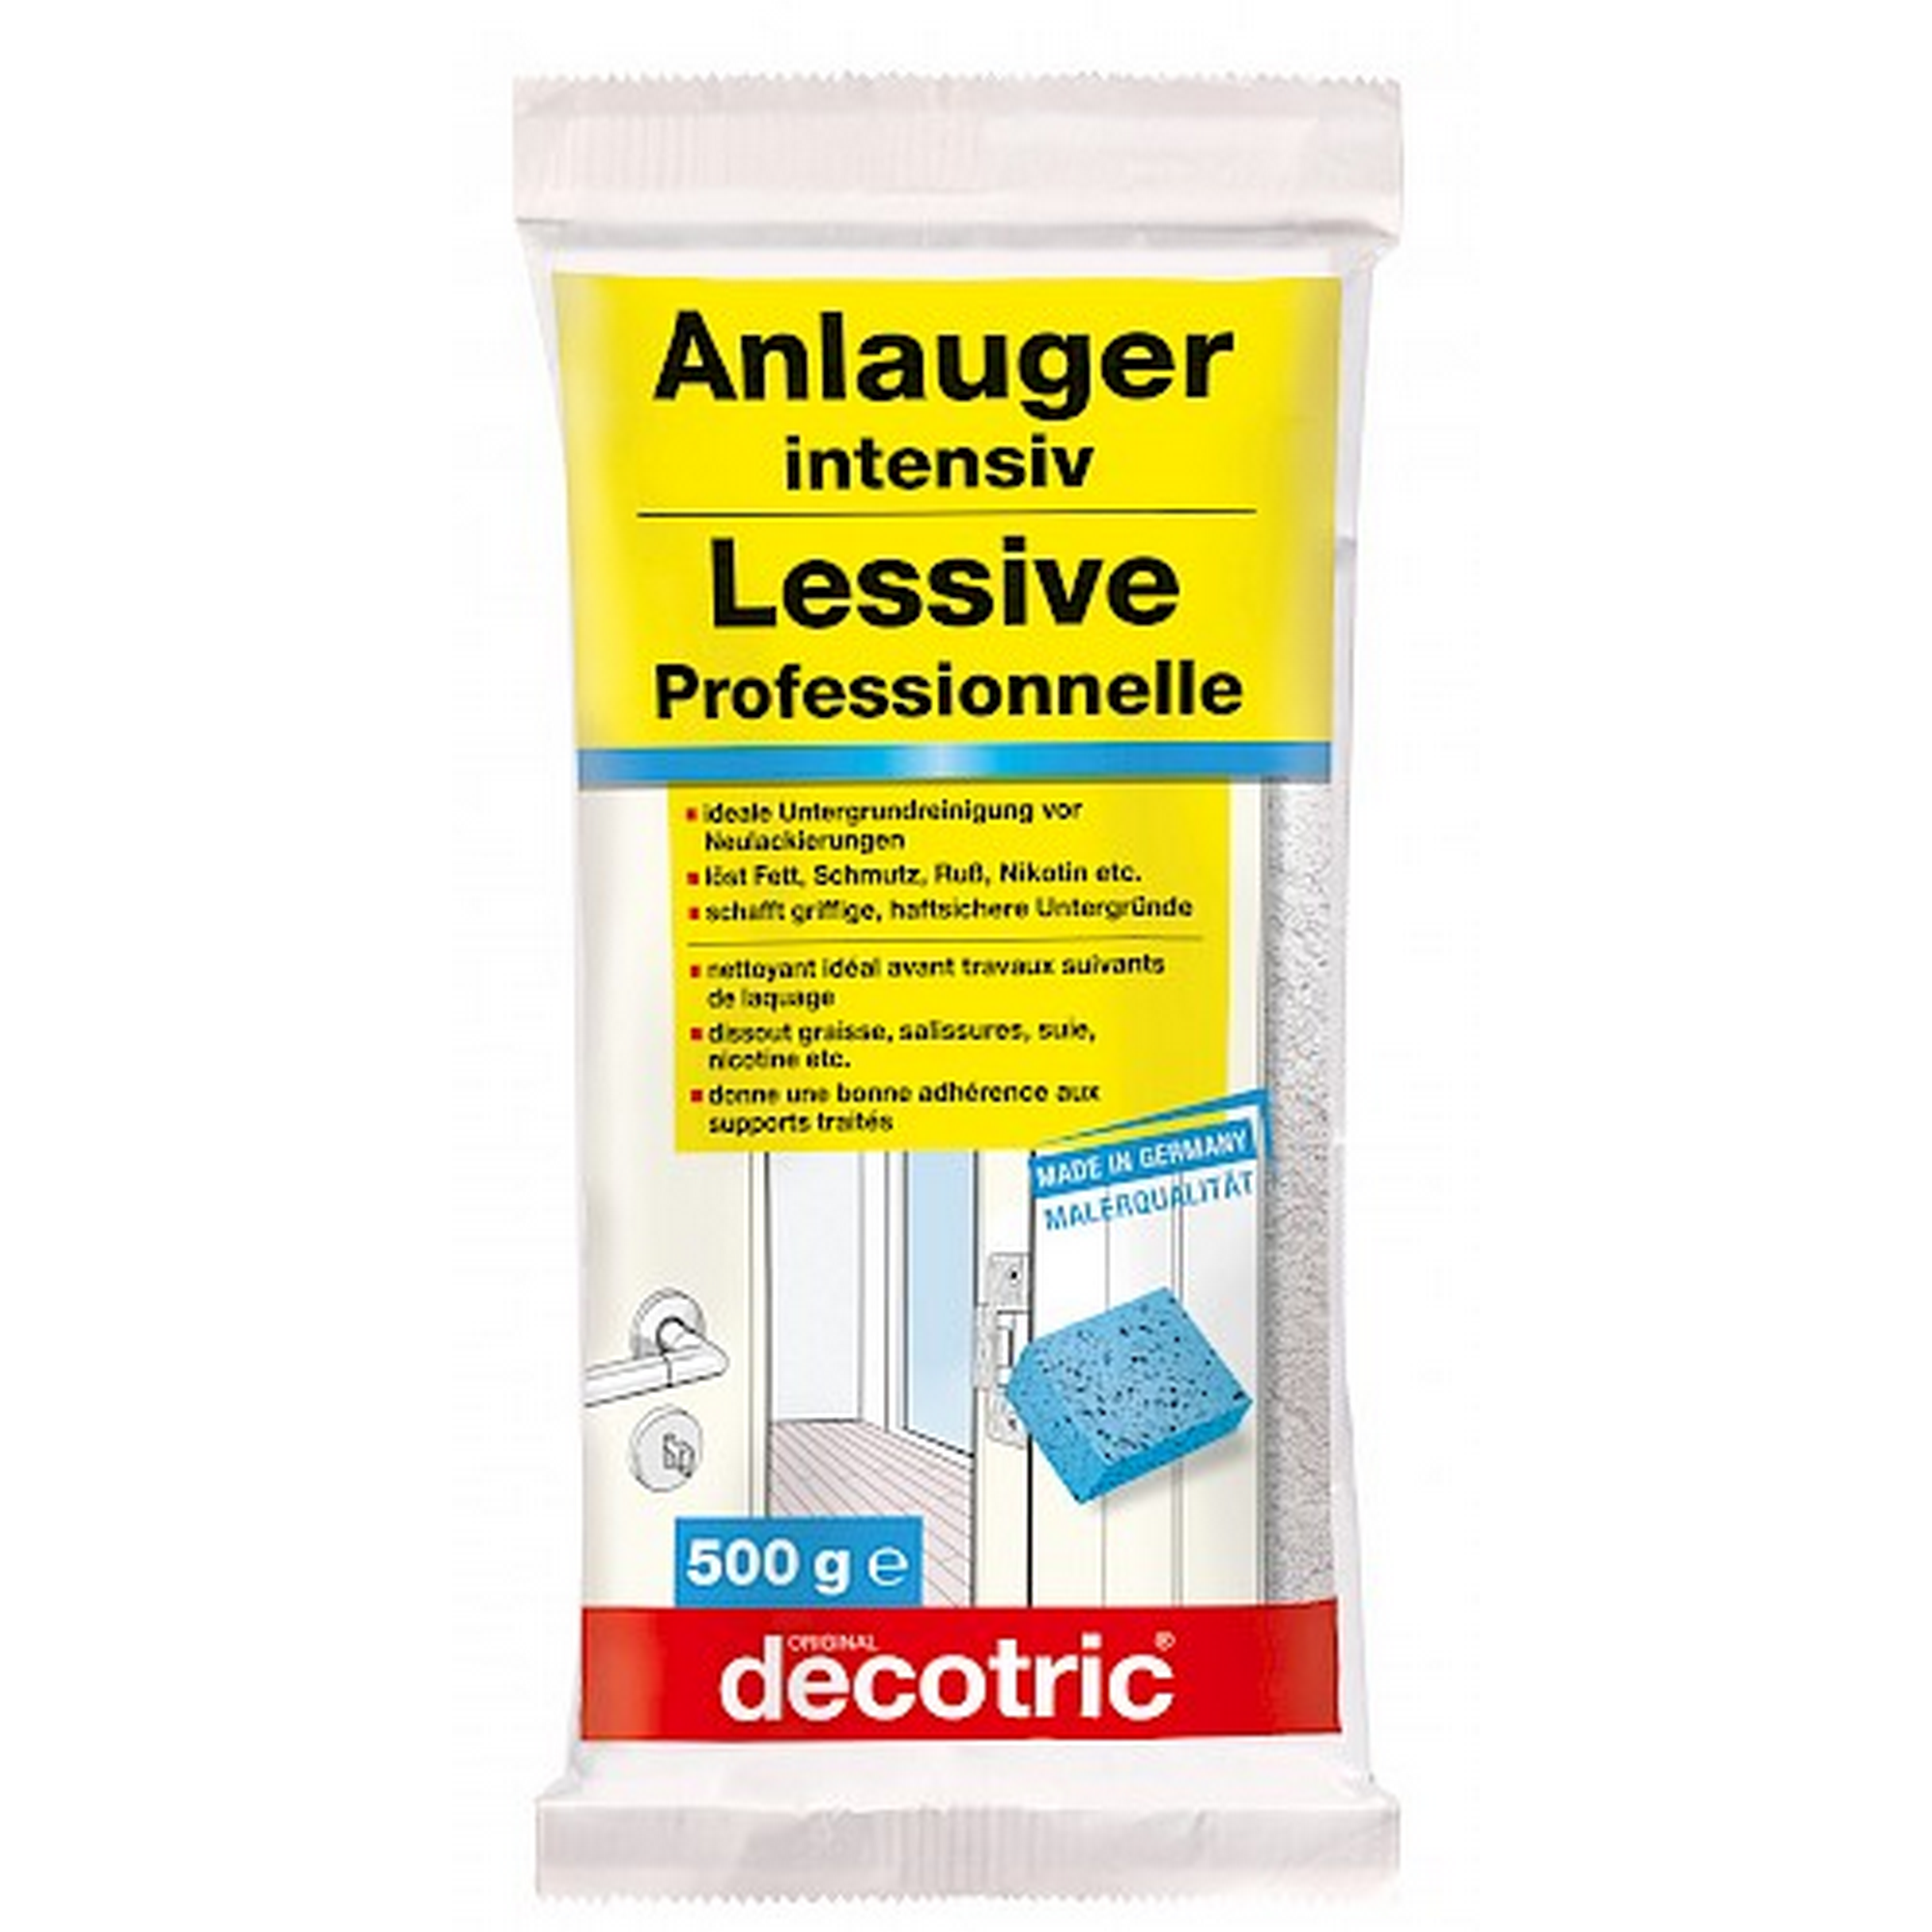 Anlauger 'intensiv' 500 g + product picture